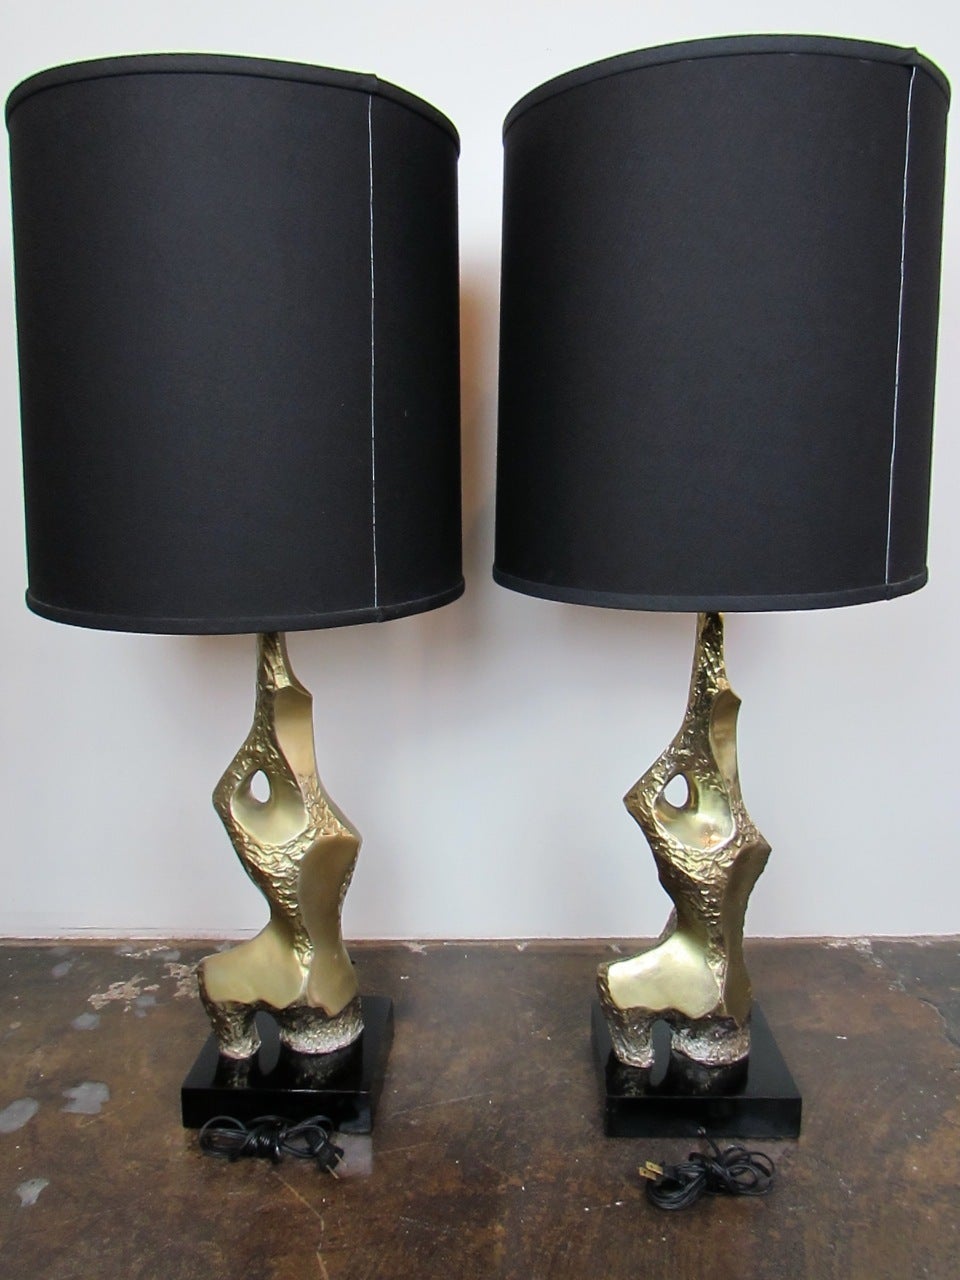 20th Century Pair of Brass Brutalist Table Lamps by Maurizio Tempestini for Laurel